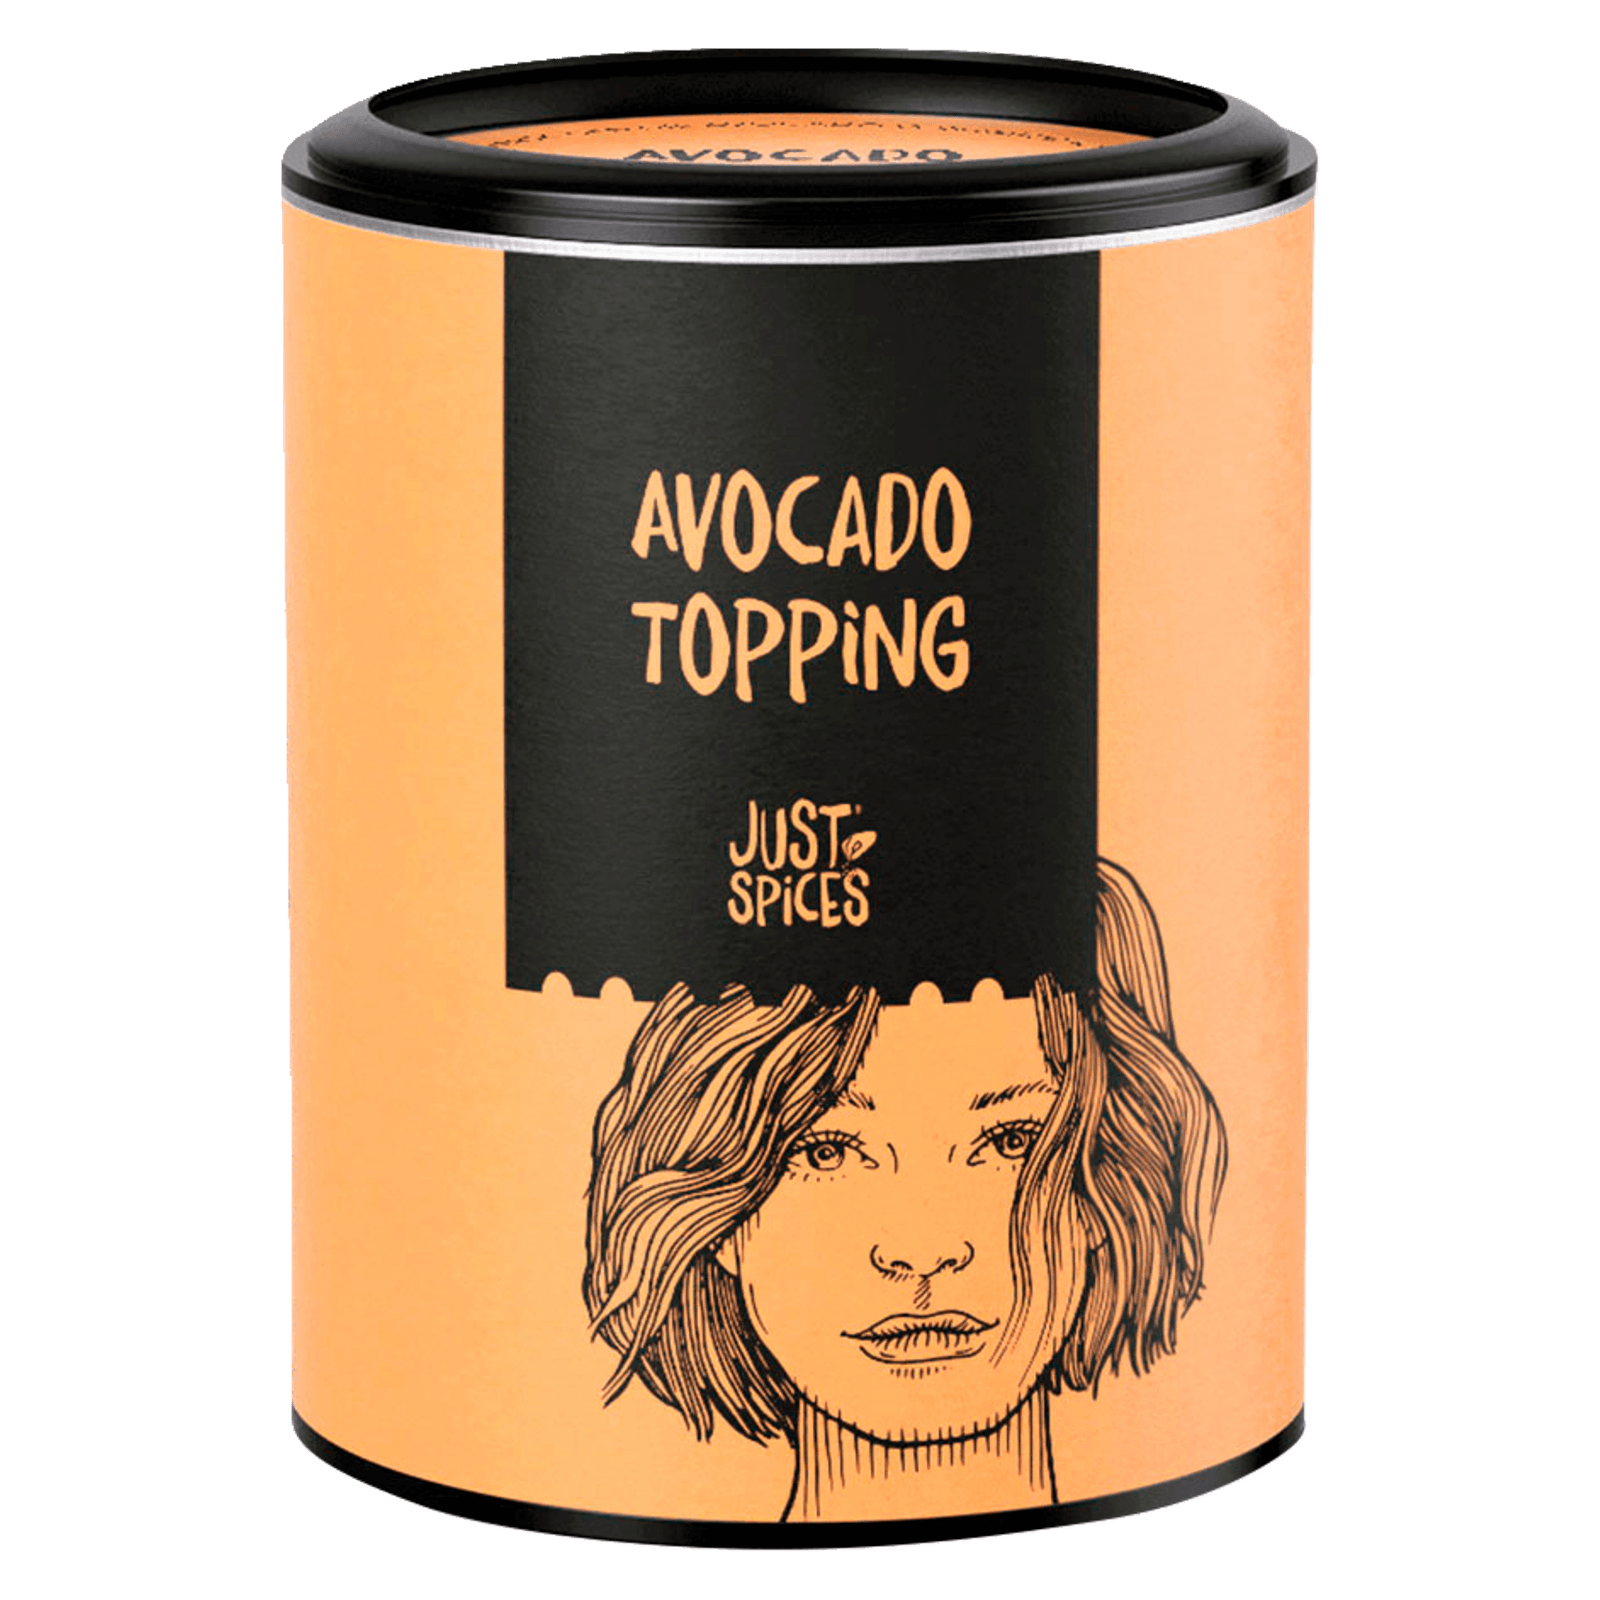 Just Spices Avocado Topping Review